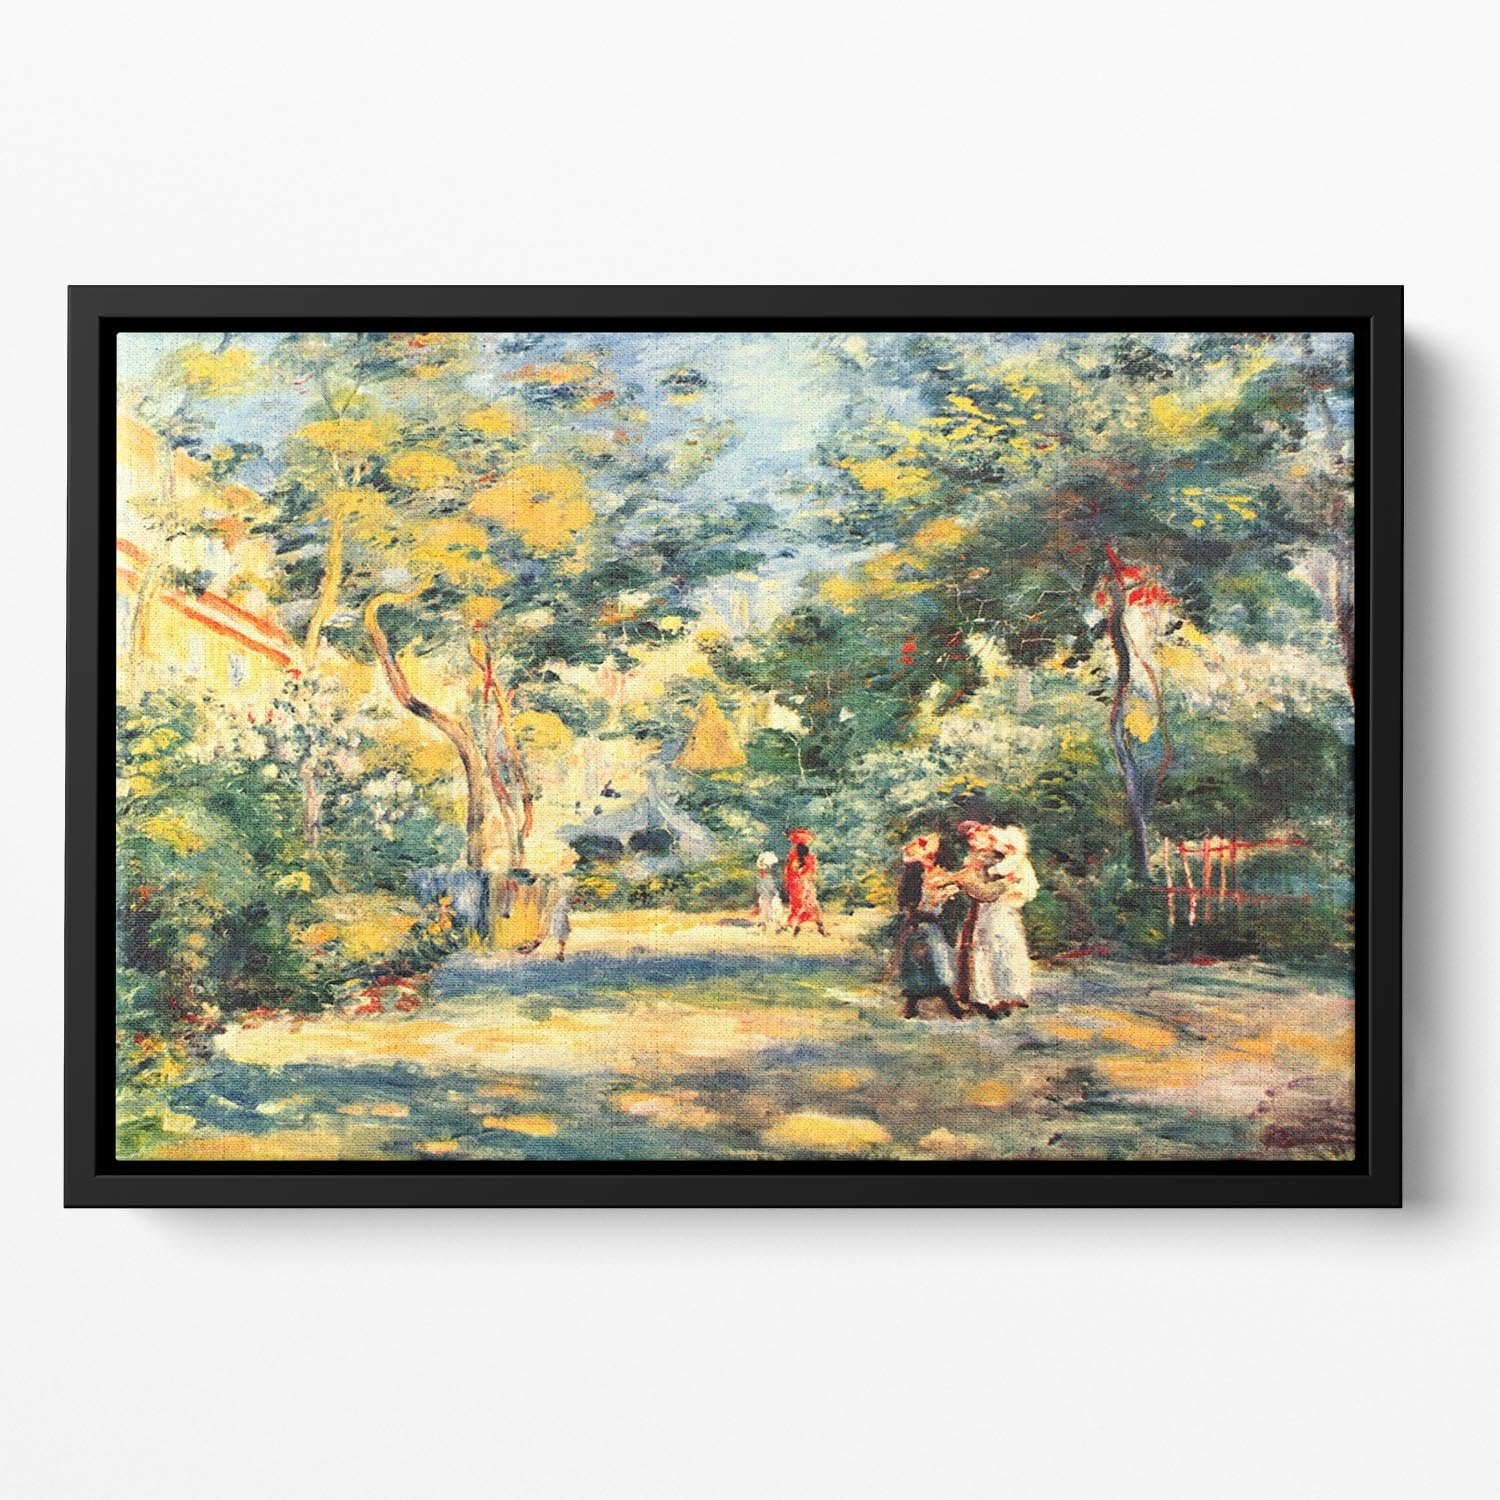 Figures in the garden by Renoir Floating Framed Canvas